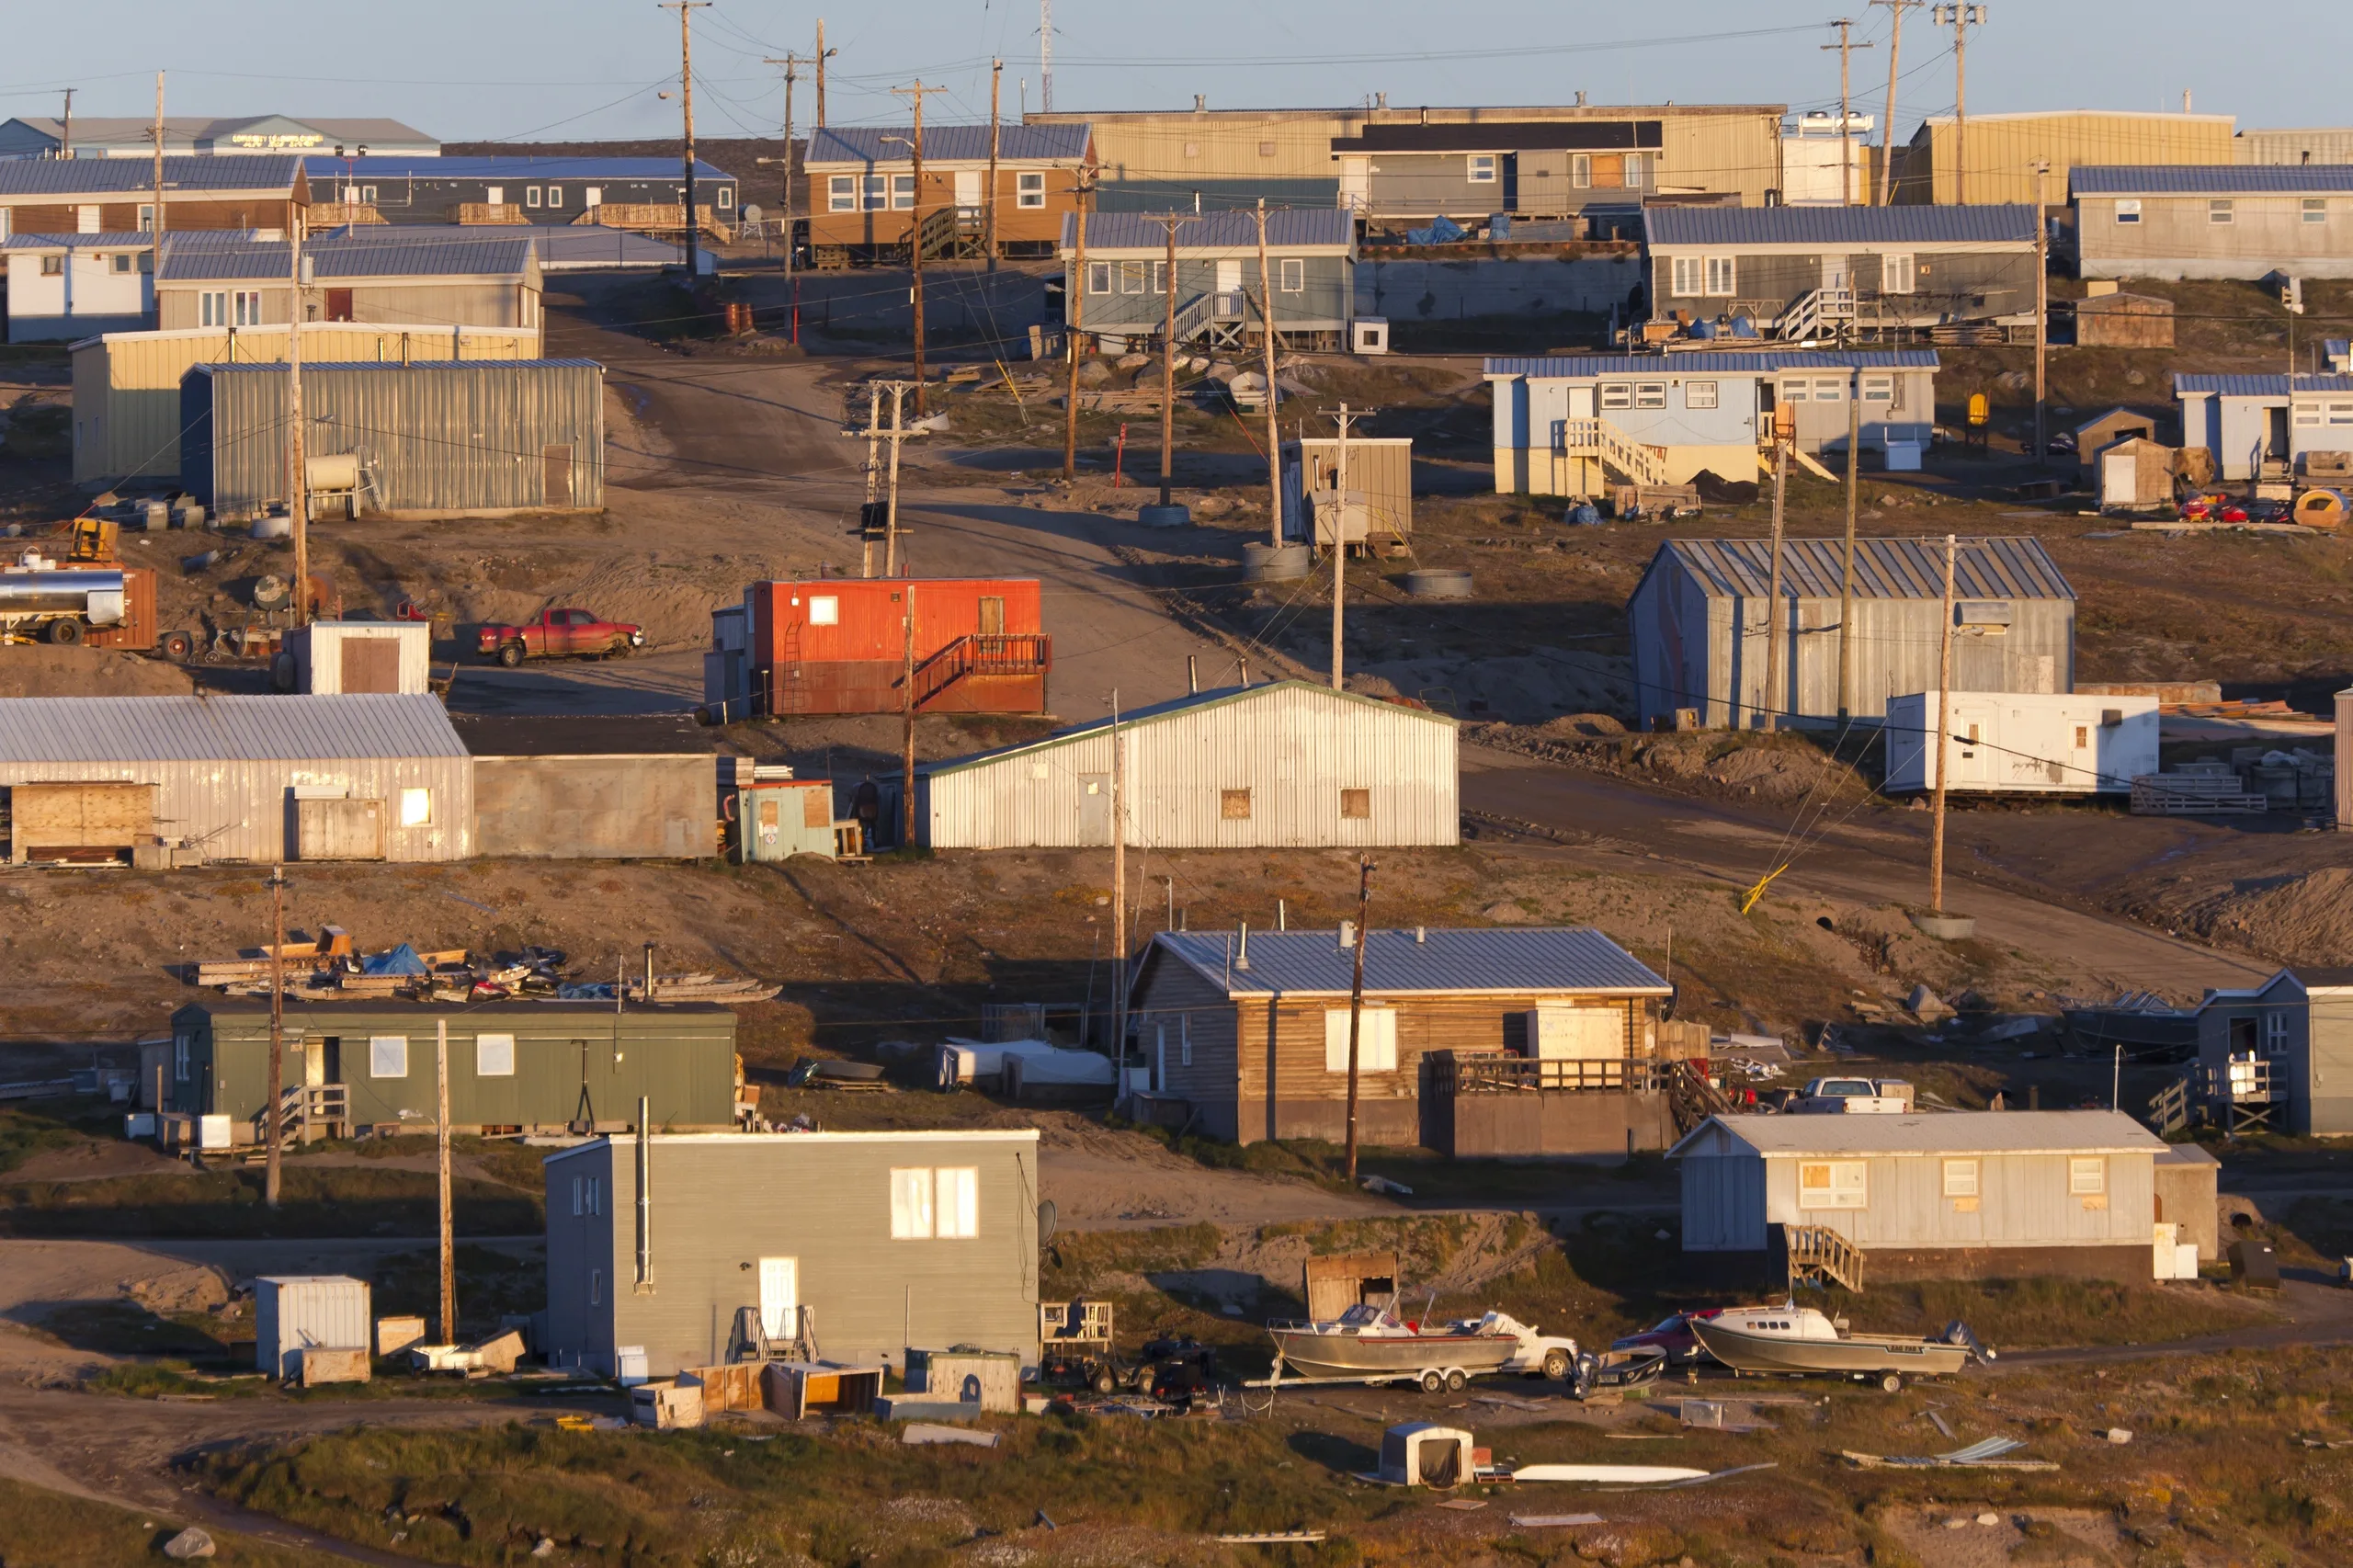 An aerial view of Nunavut, Canada with many houses and industrial buildings in view.